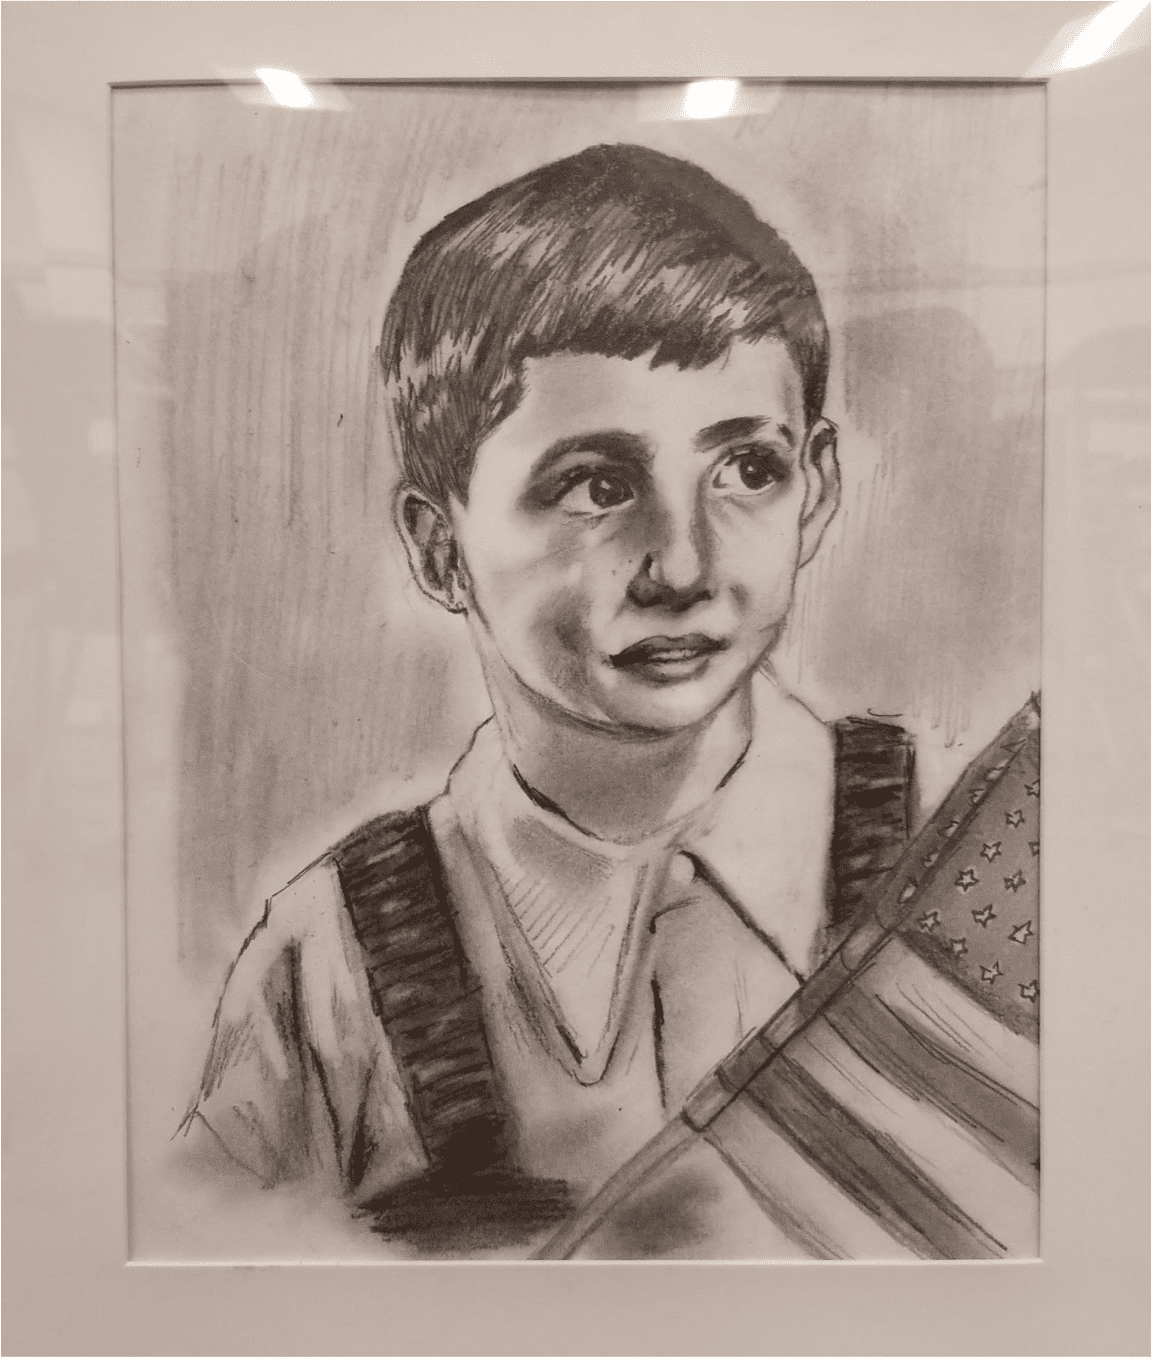 A black and white pencil drawing of Roger Loria as a young boy holding an American flag.